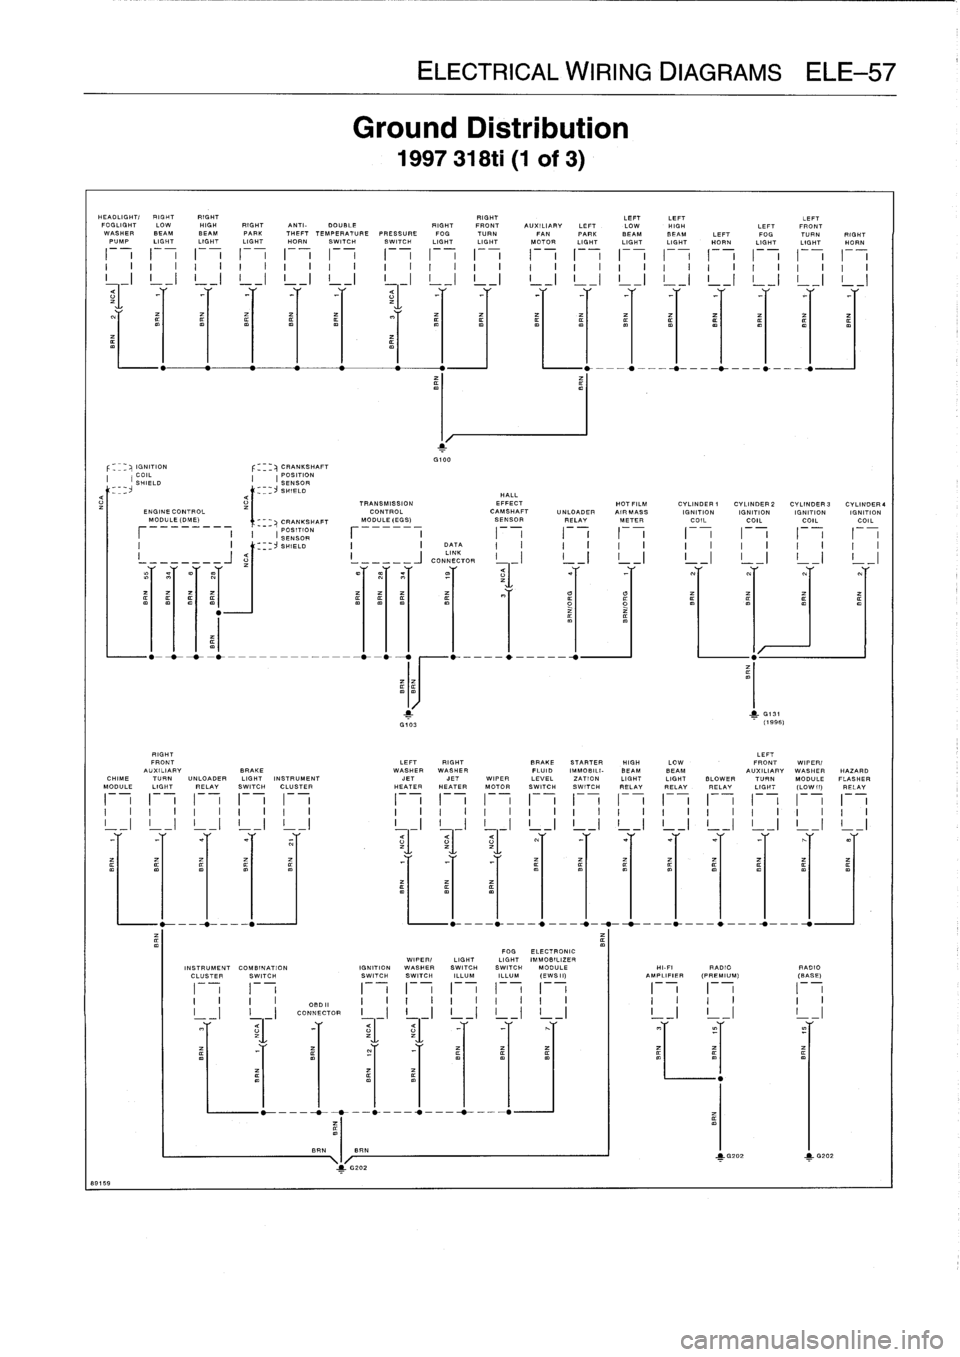 BMW 328i 1995 E36 Service Manual 
Ground
Distribution

1997
318ti
(1
of
3)

HEADLIGHT/RIGHTRIGHT

	

RIGHT

	

LEFTLEFT

	

LEFT

89159

FOGLIGHT
LOW
HIGH
RIGHT
ANTI-
DOUBLE

	

RIGHT
FRONT
AUXILIARY
LEFT
LOW
HIGH

	

LEFT
FRONT
WASH